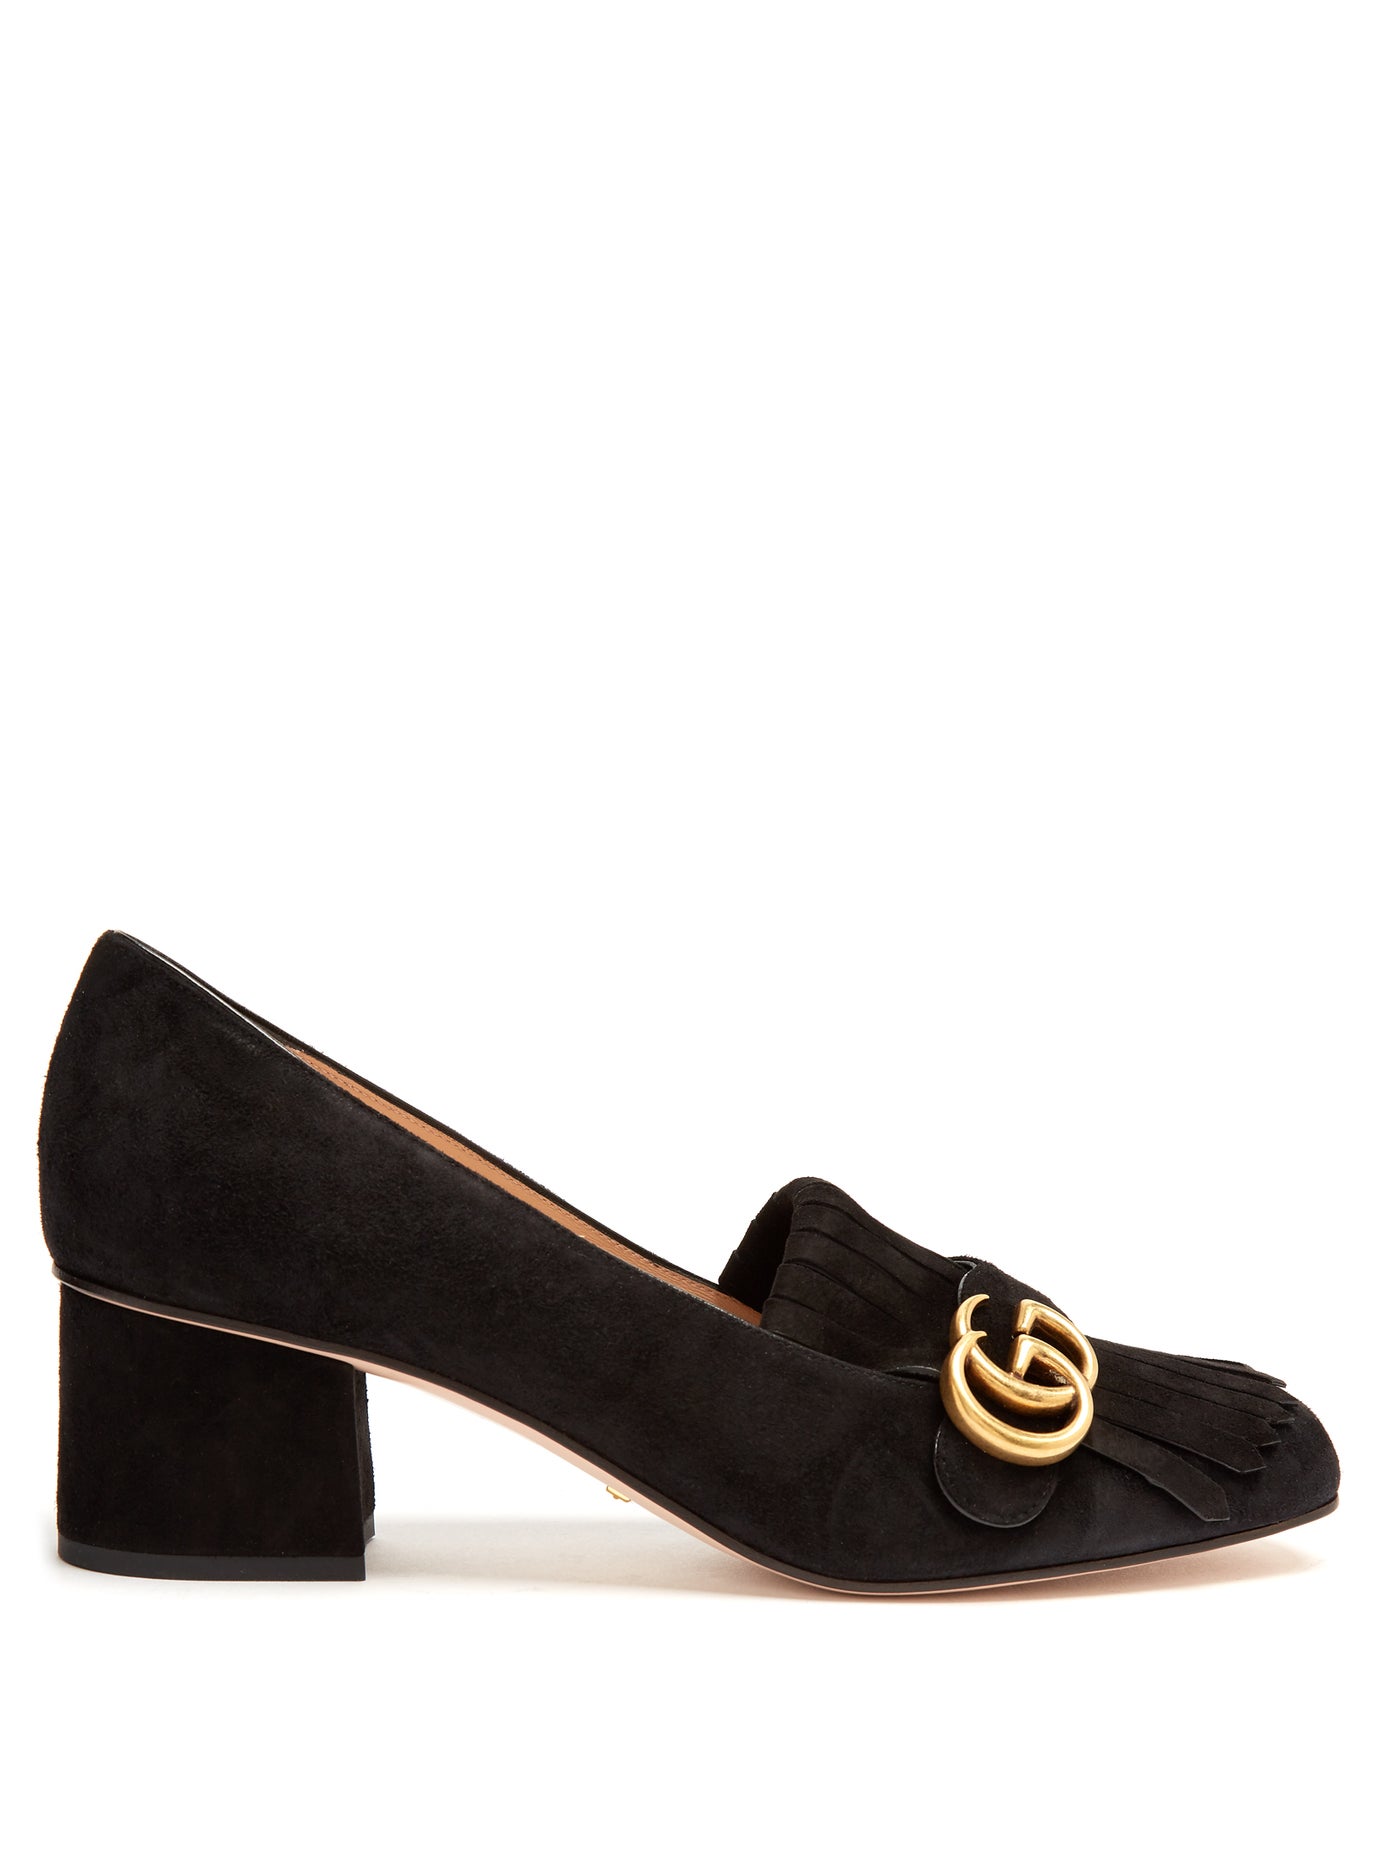 Gucci - Marmont Fringed Suede Loafers | ABOUT ICONS